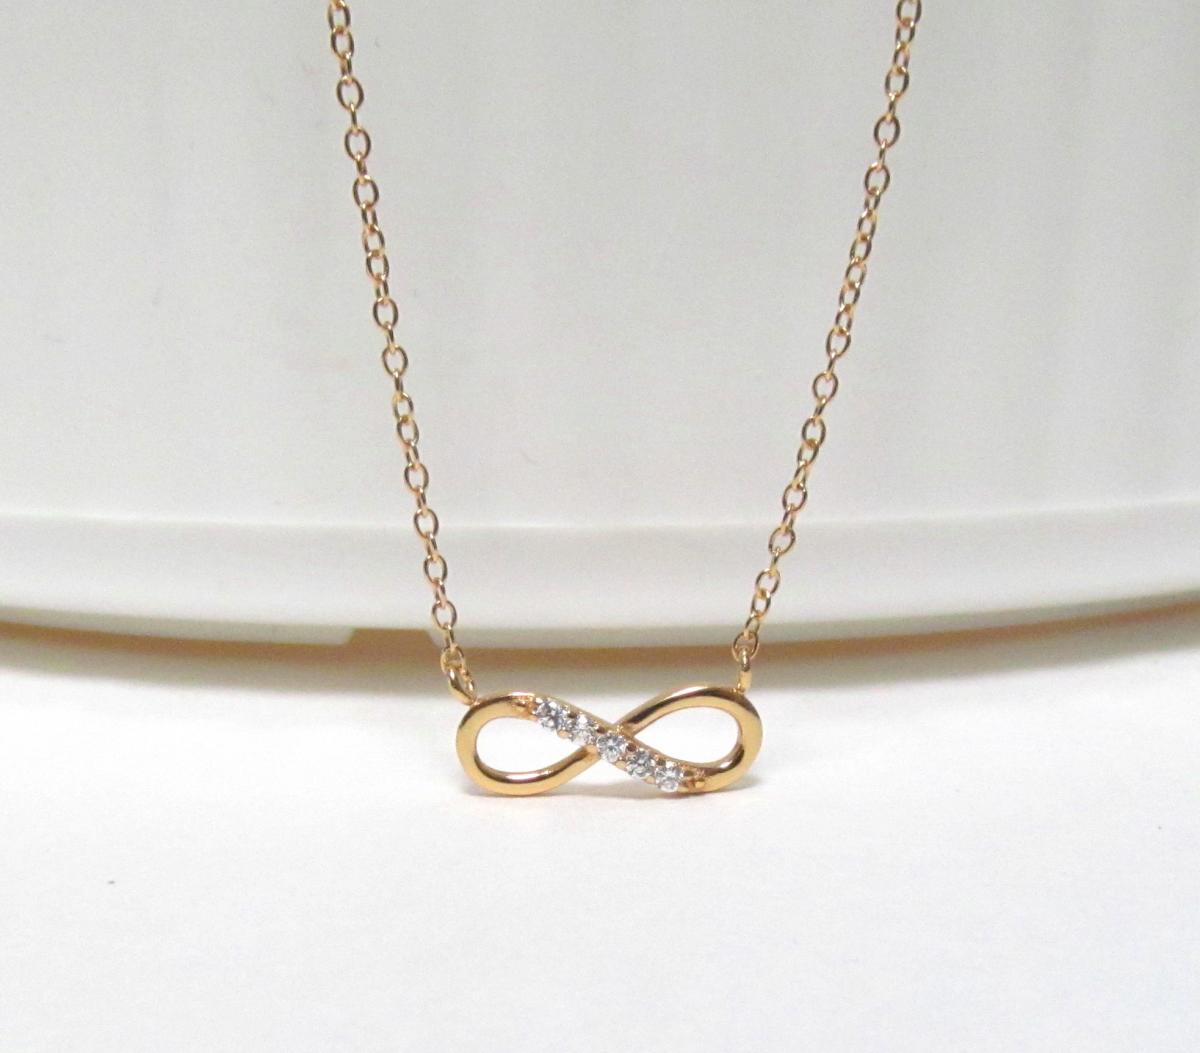 Infinity Necklace-petite 14 Kt Gold Over 925 Sterling Silver Necklace With Cz-18 Inch Cable Chain